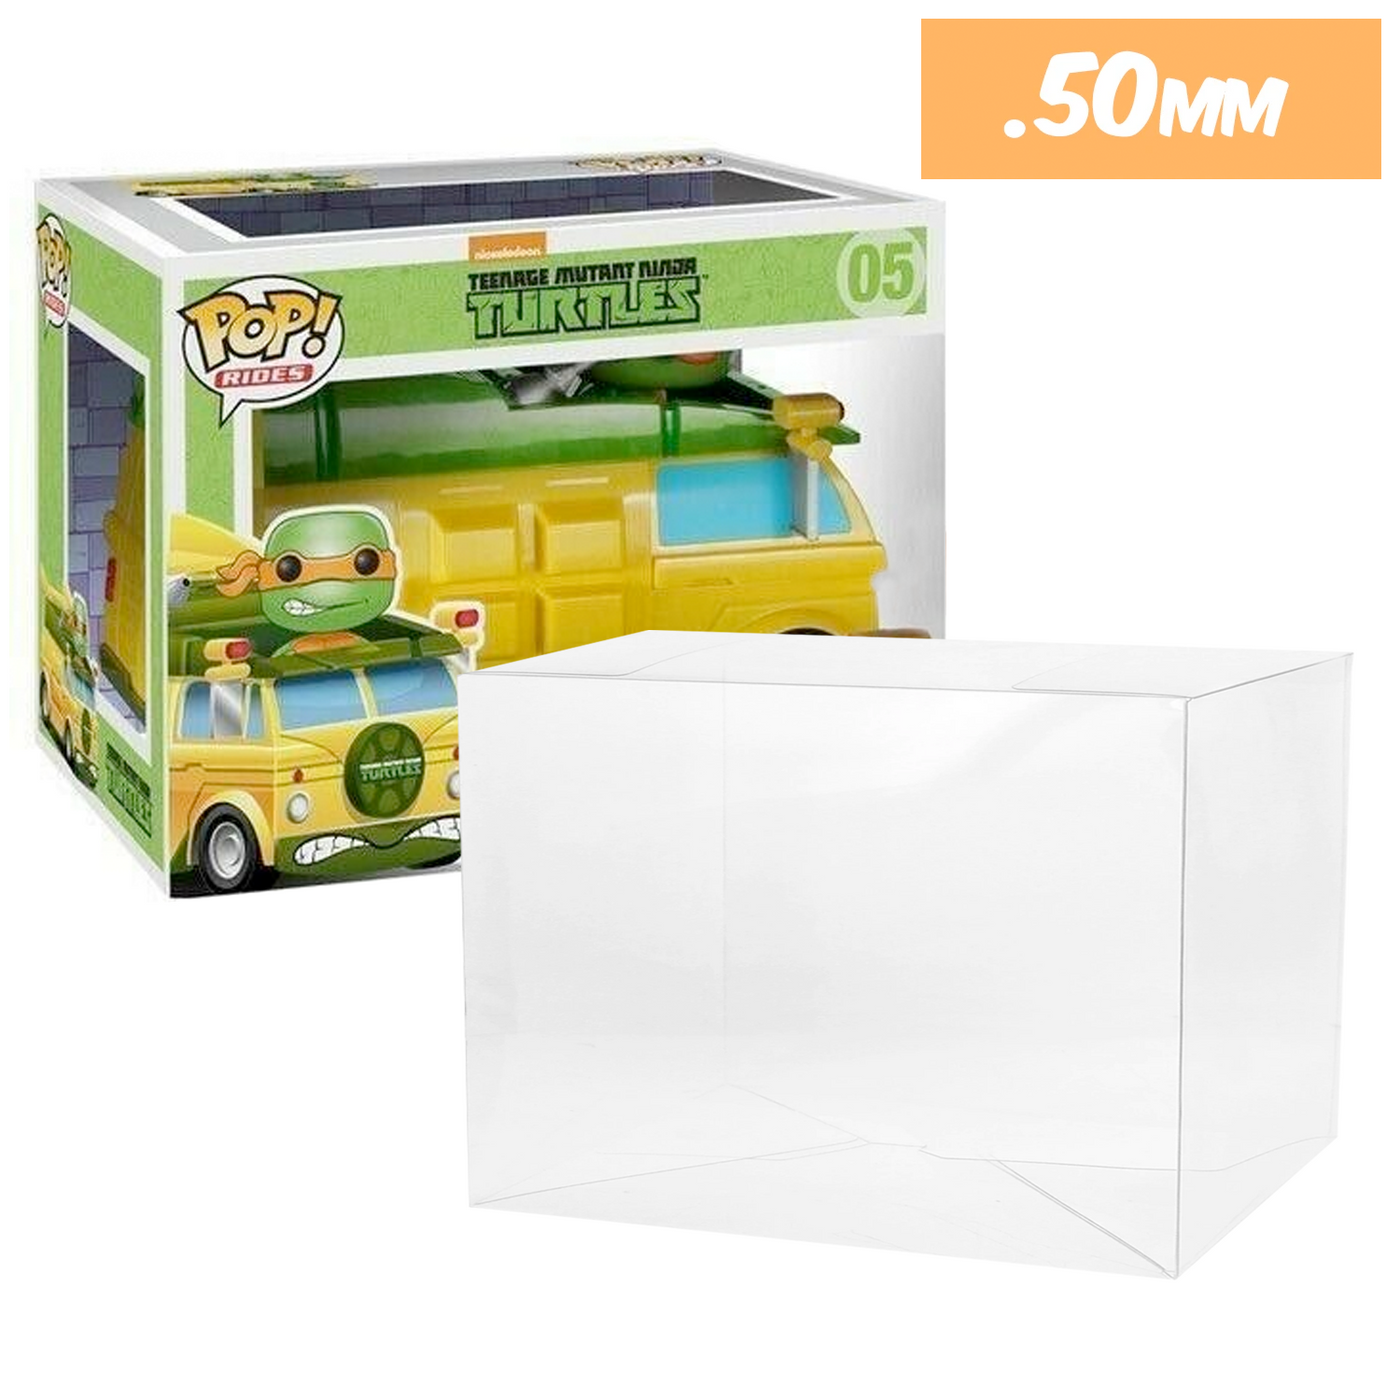 tmnt turtle van pop rides best funko pop protectors thick strong uv scratch flat top stack vinyl display geek plastic shield vaulted eco armor fits collect protect display case kollector protector